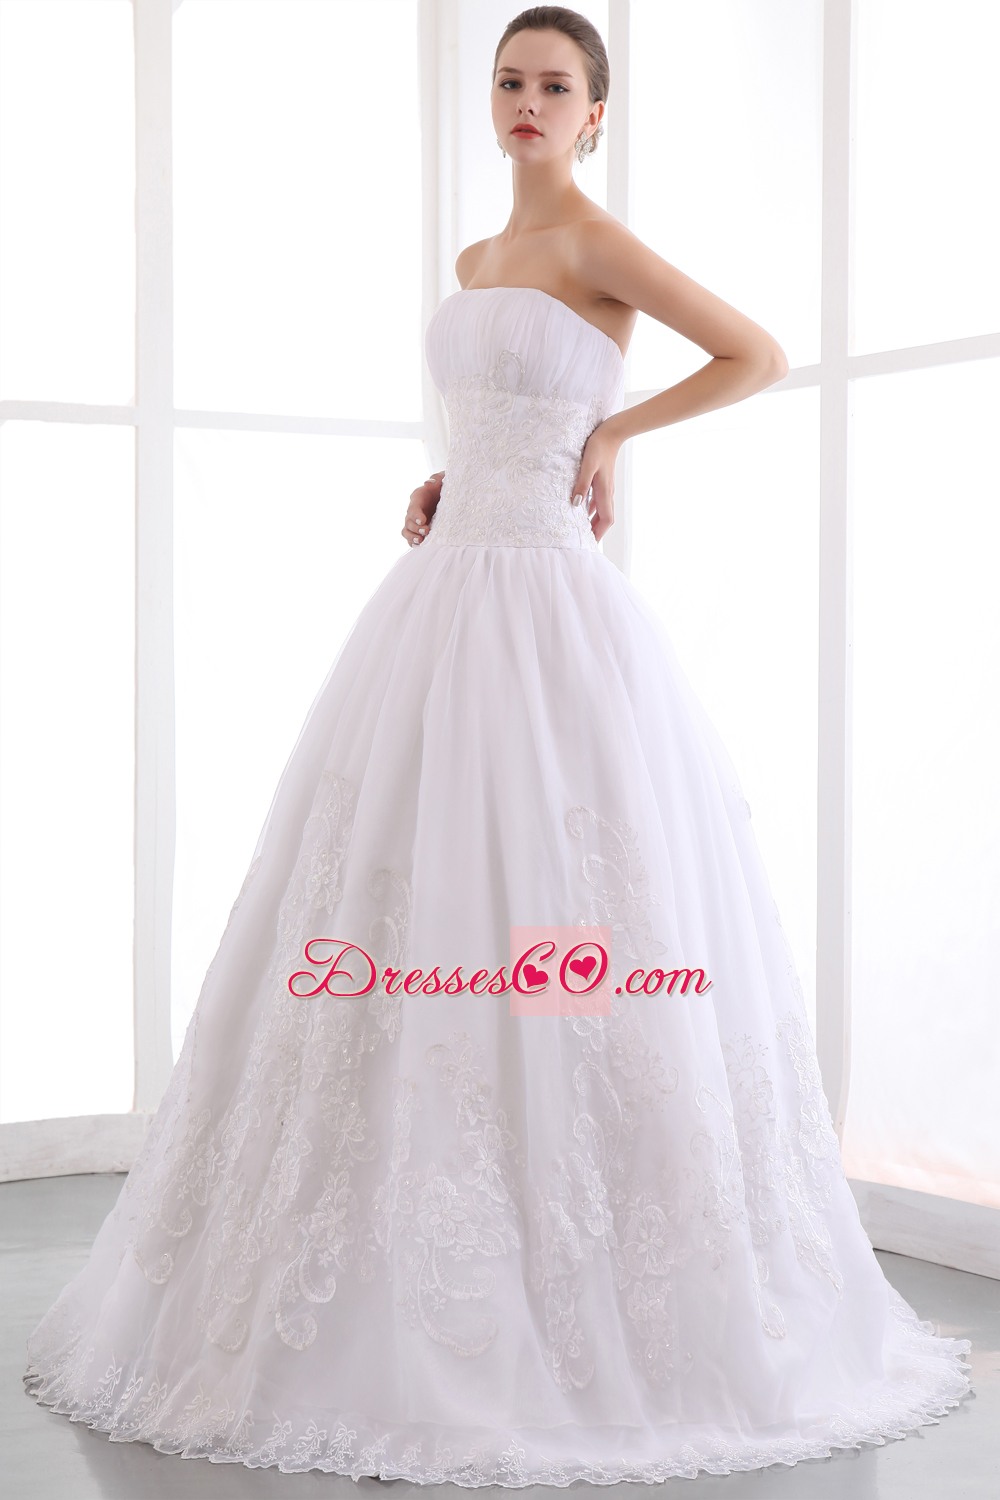 Gorgeous A-line Strapless Long Taffeta And Lace Wedding Dress